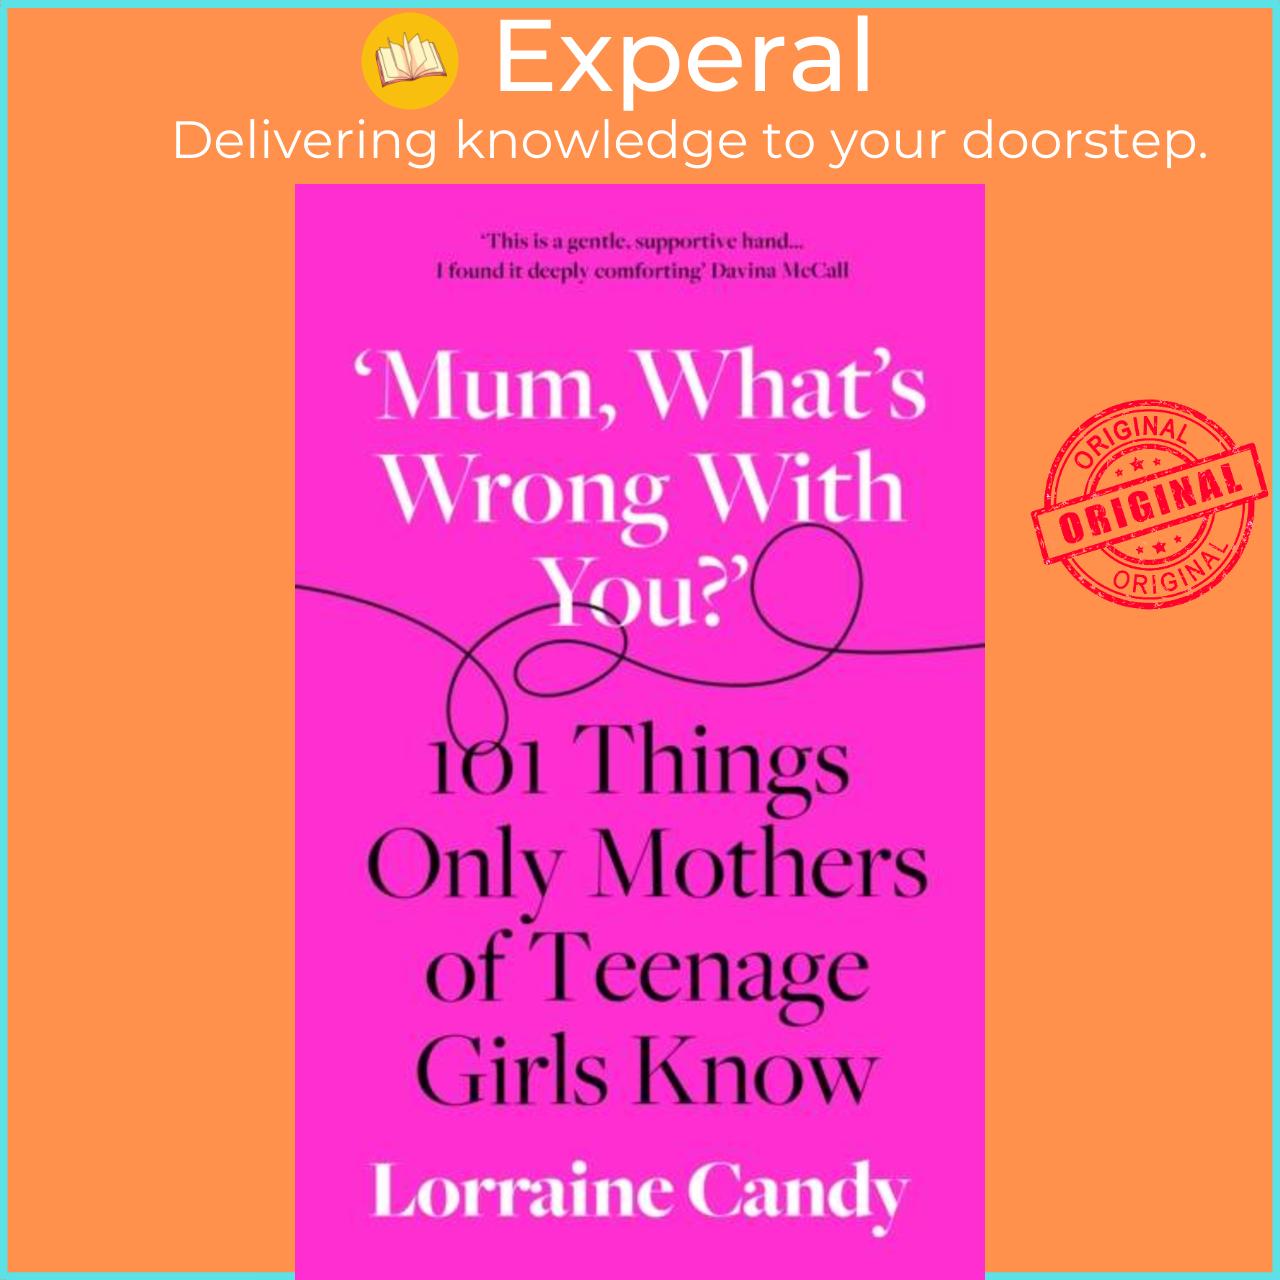 Sách - 'Mum, What's Wrong with You?' - 101 Things Only Mothers of Teenage Girl by Lorraine Candy (UK edition, hardcover)